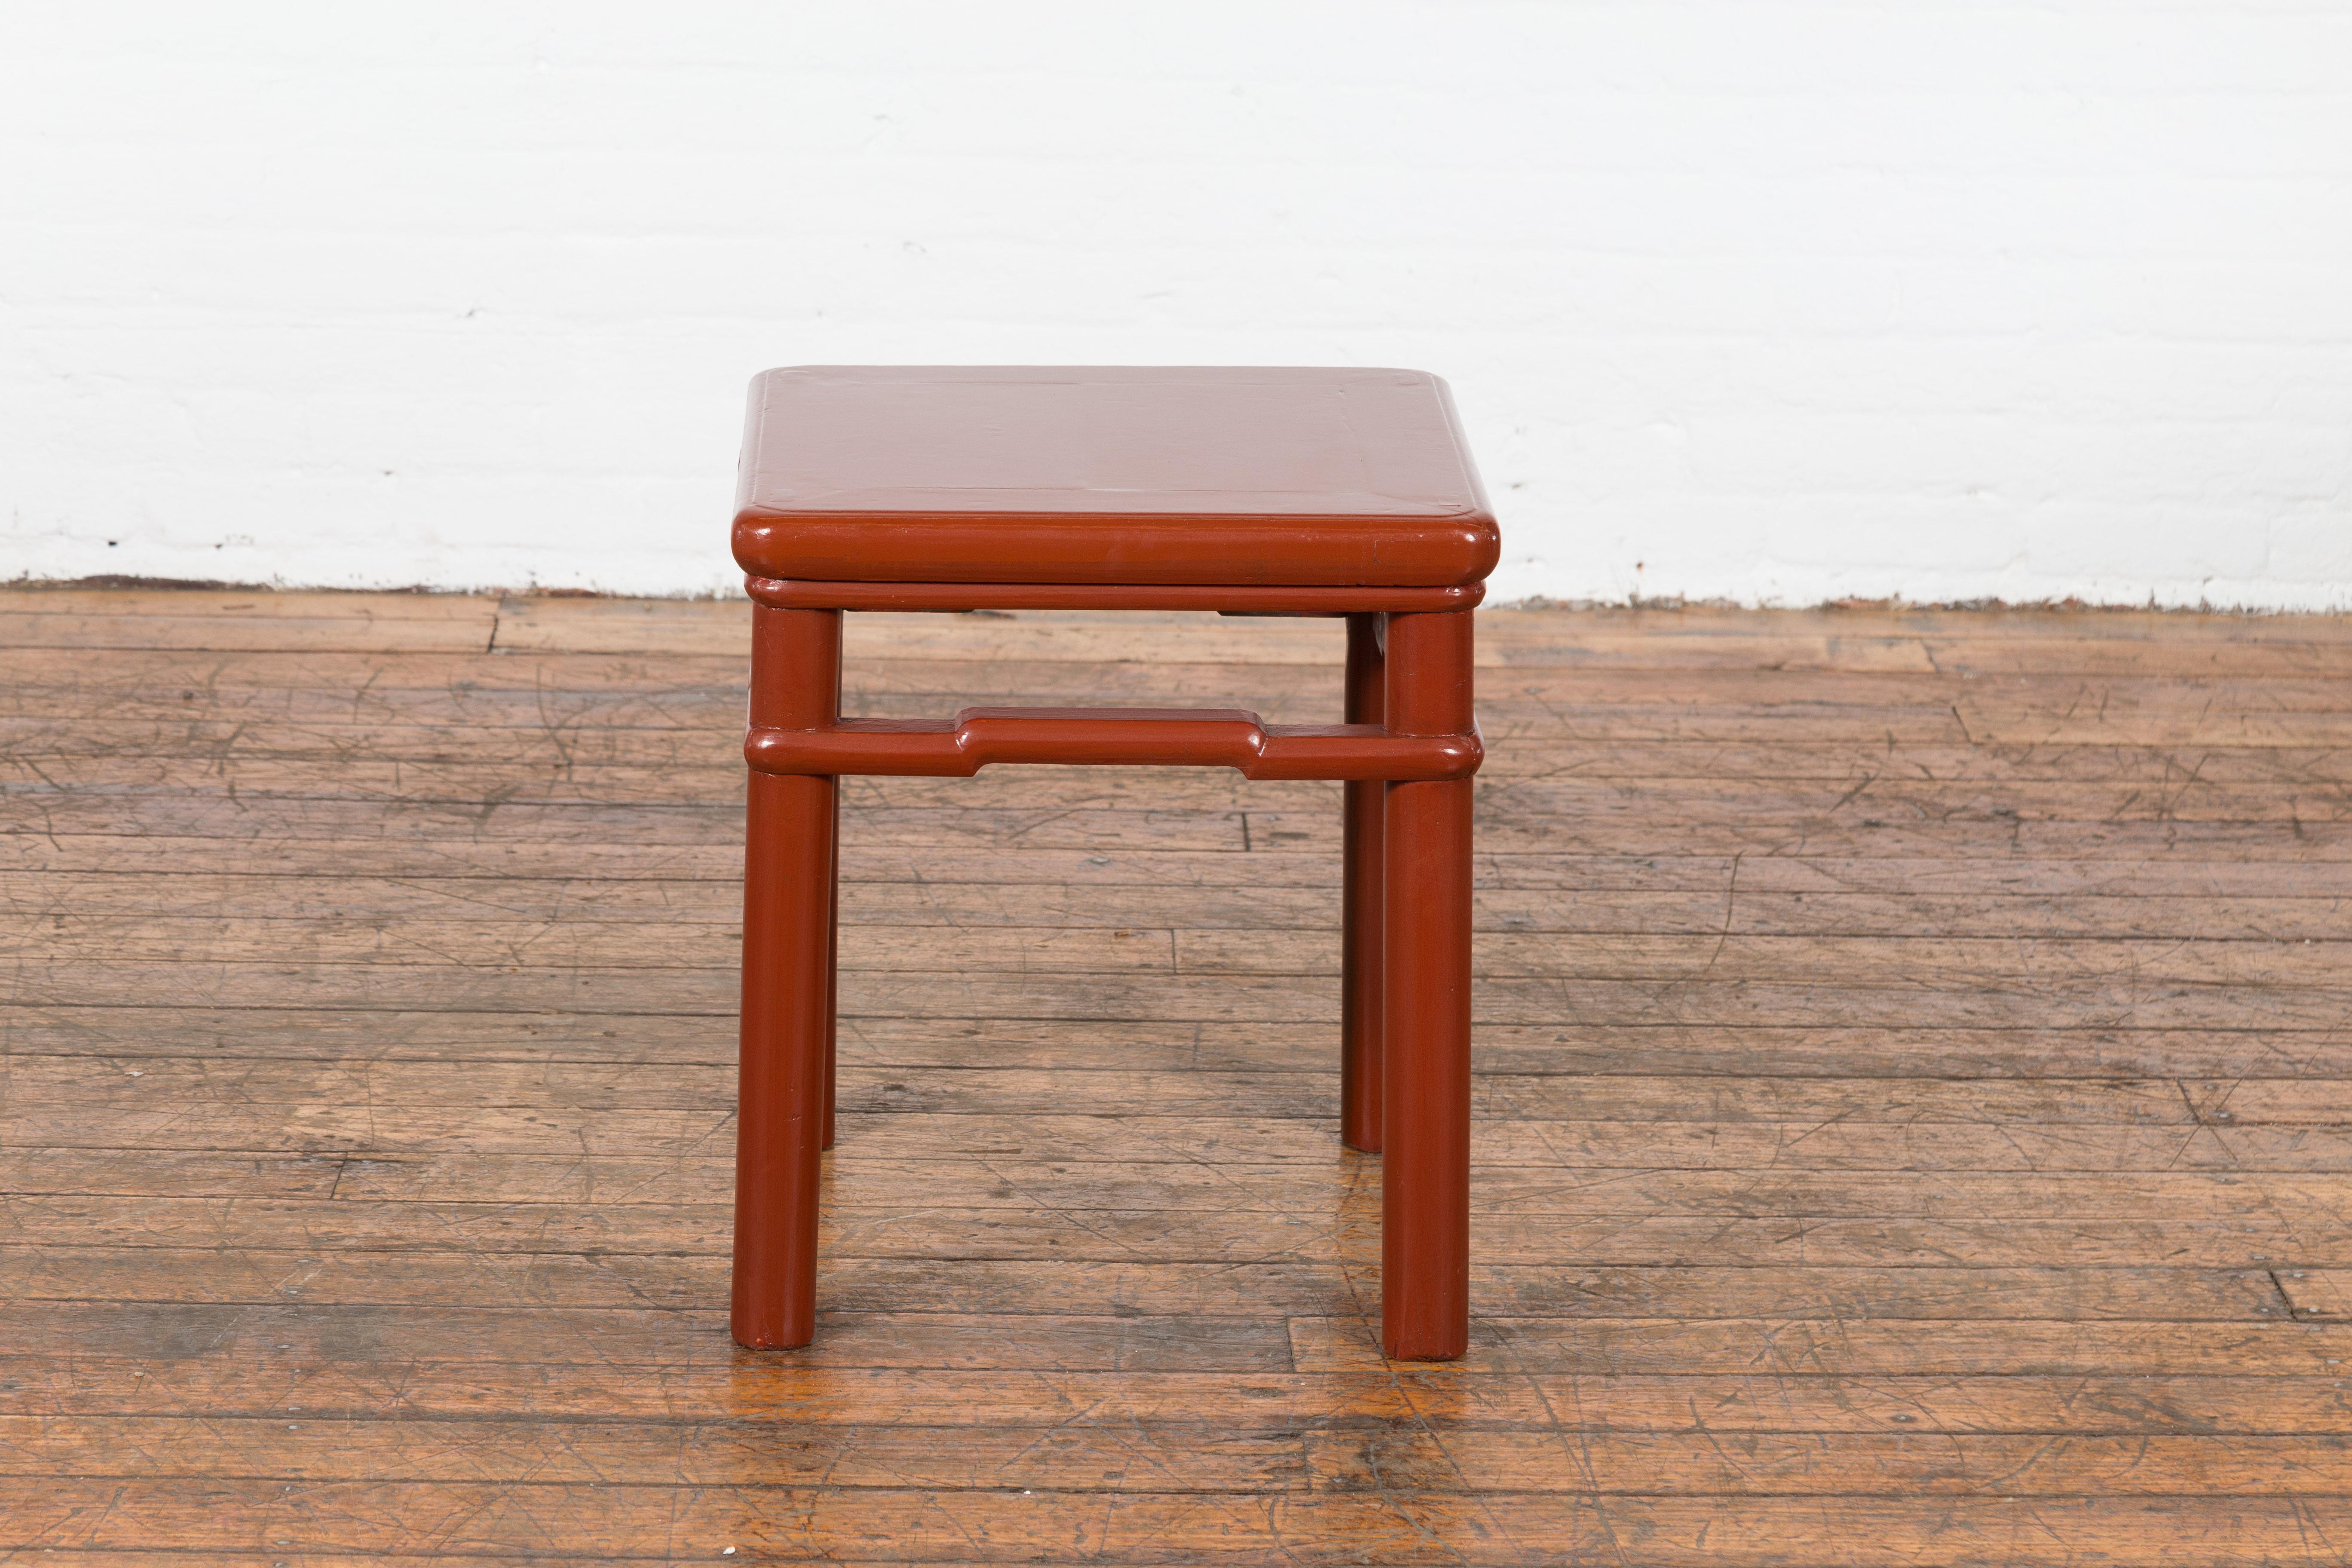 20th Century Chinese 1900s Qing Dynasty Red Lacquer Stool or Table with Humpback Stretchers For Sale